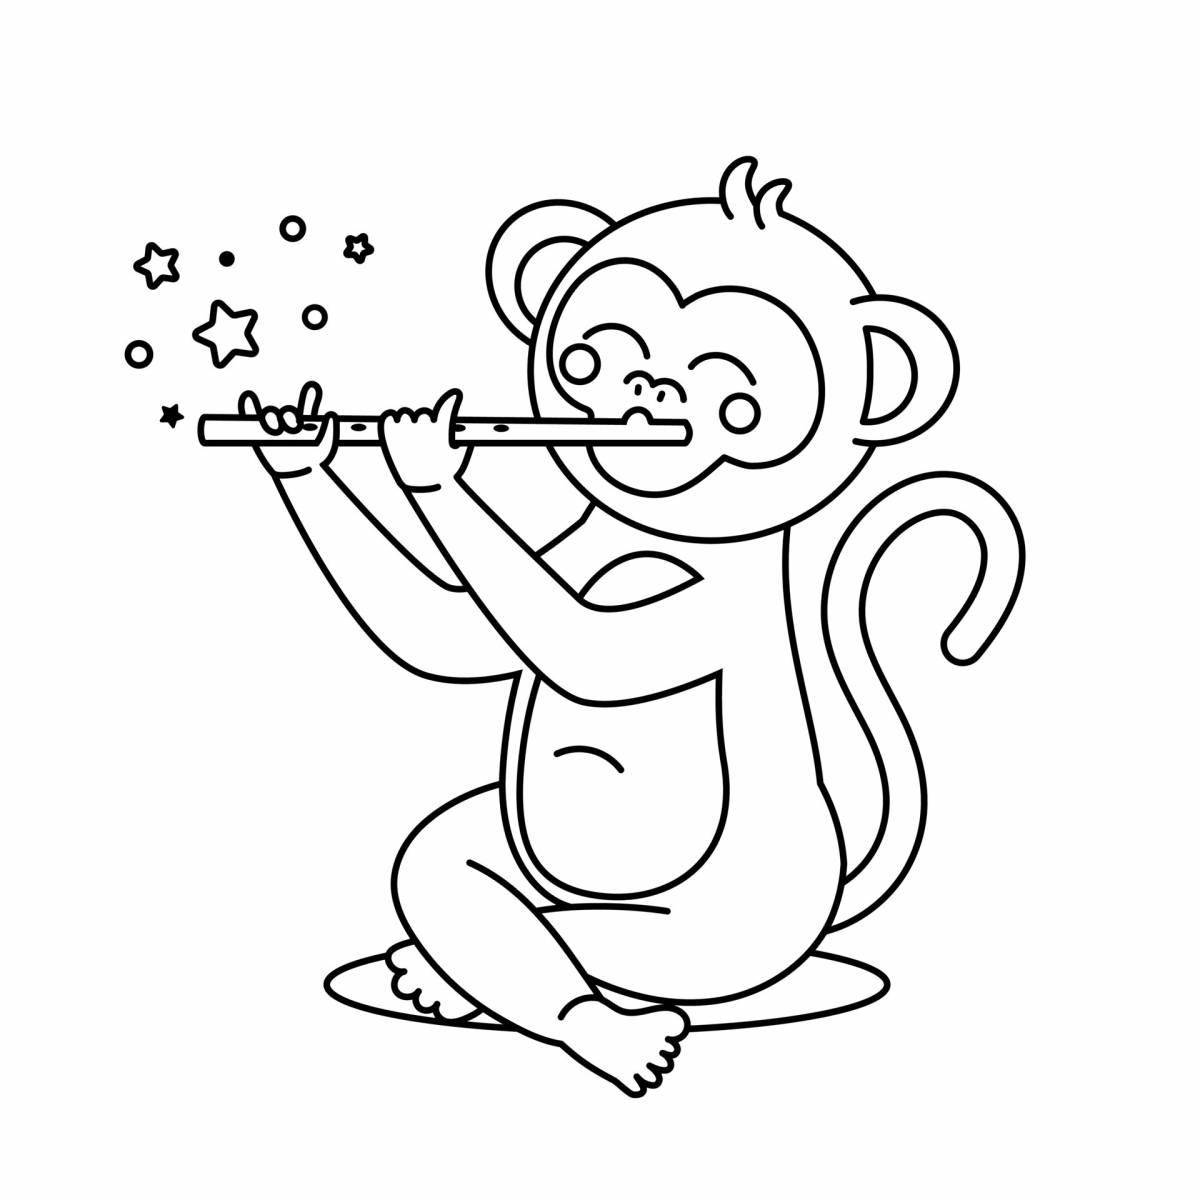 Great flute coloring book for kids